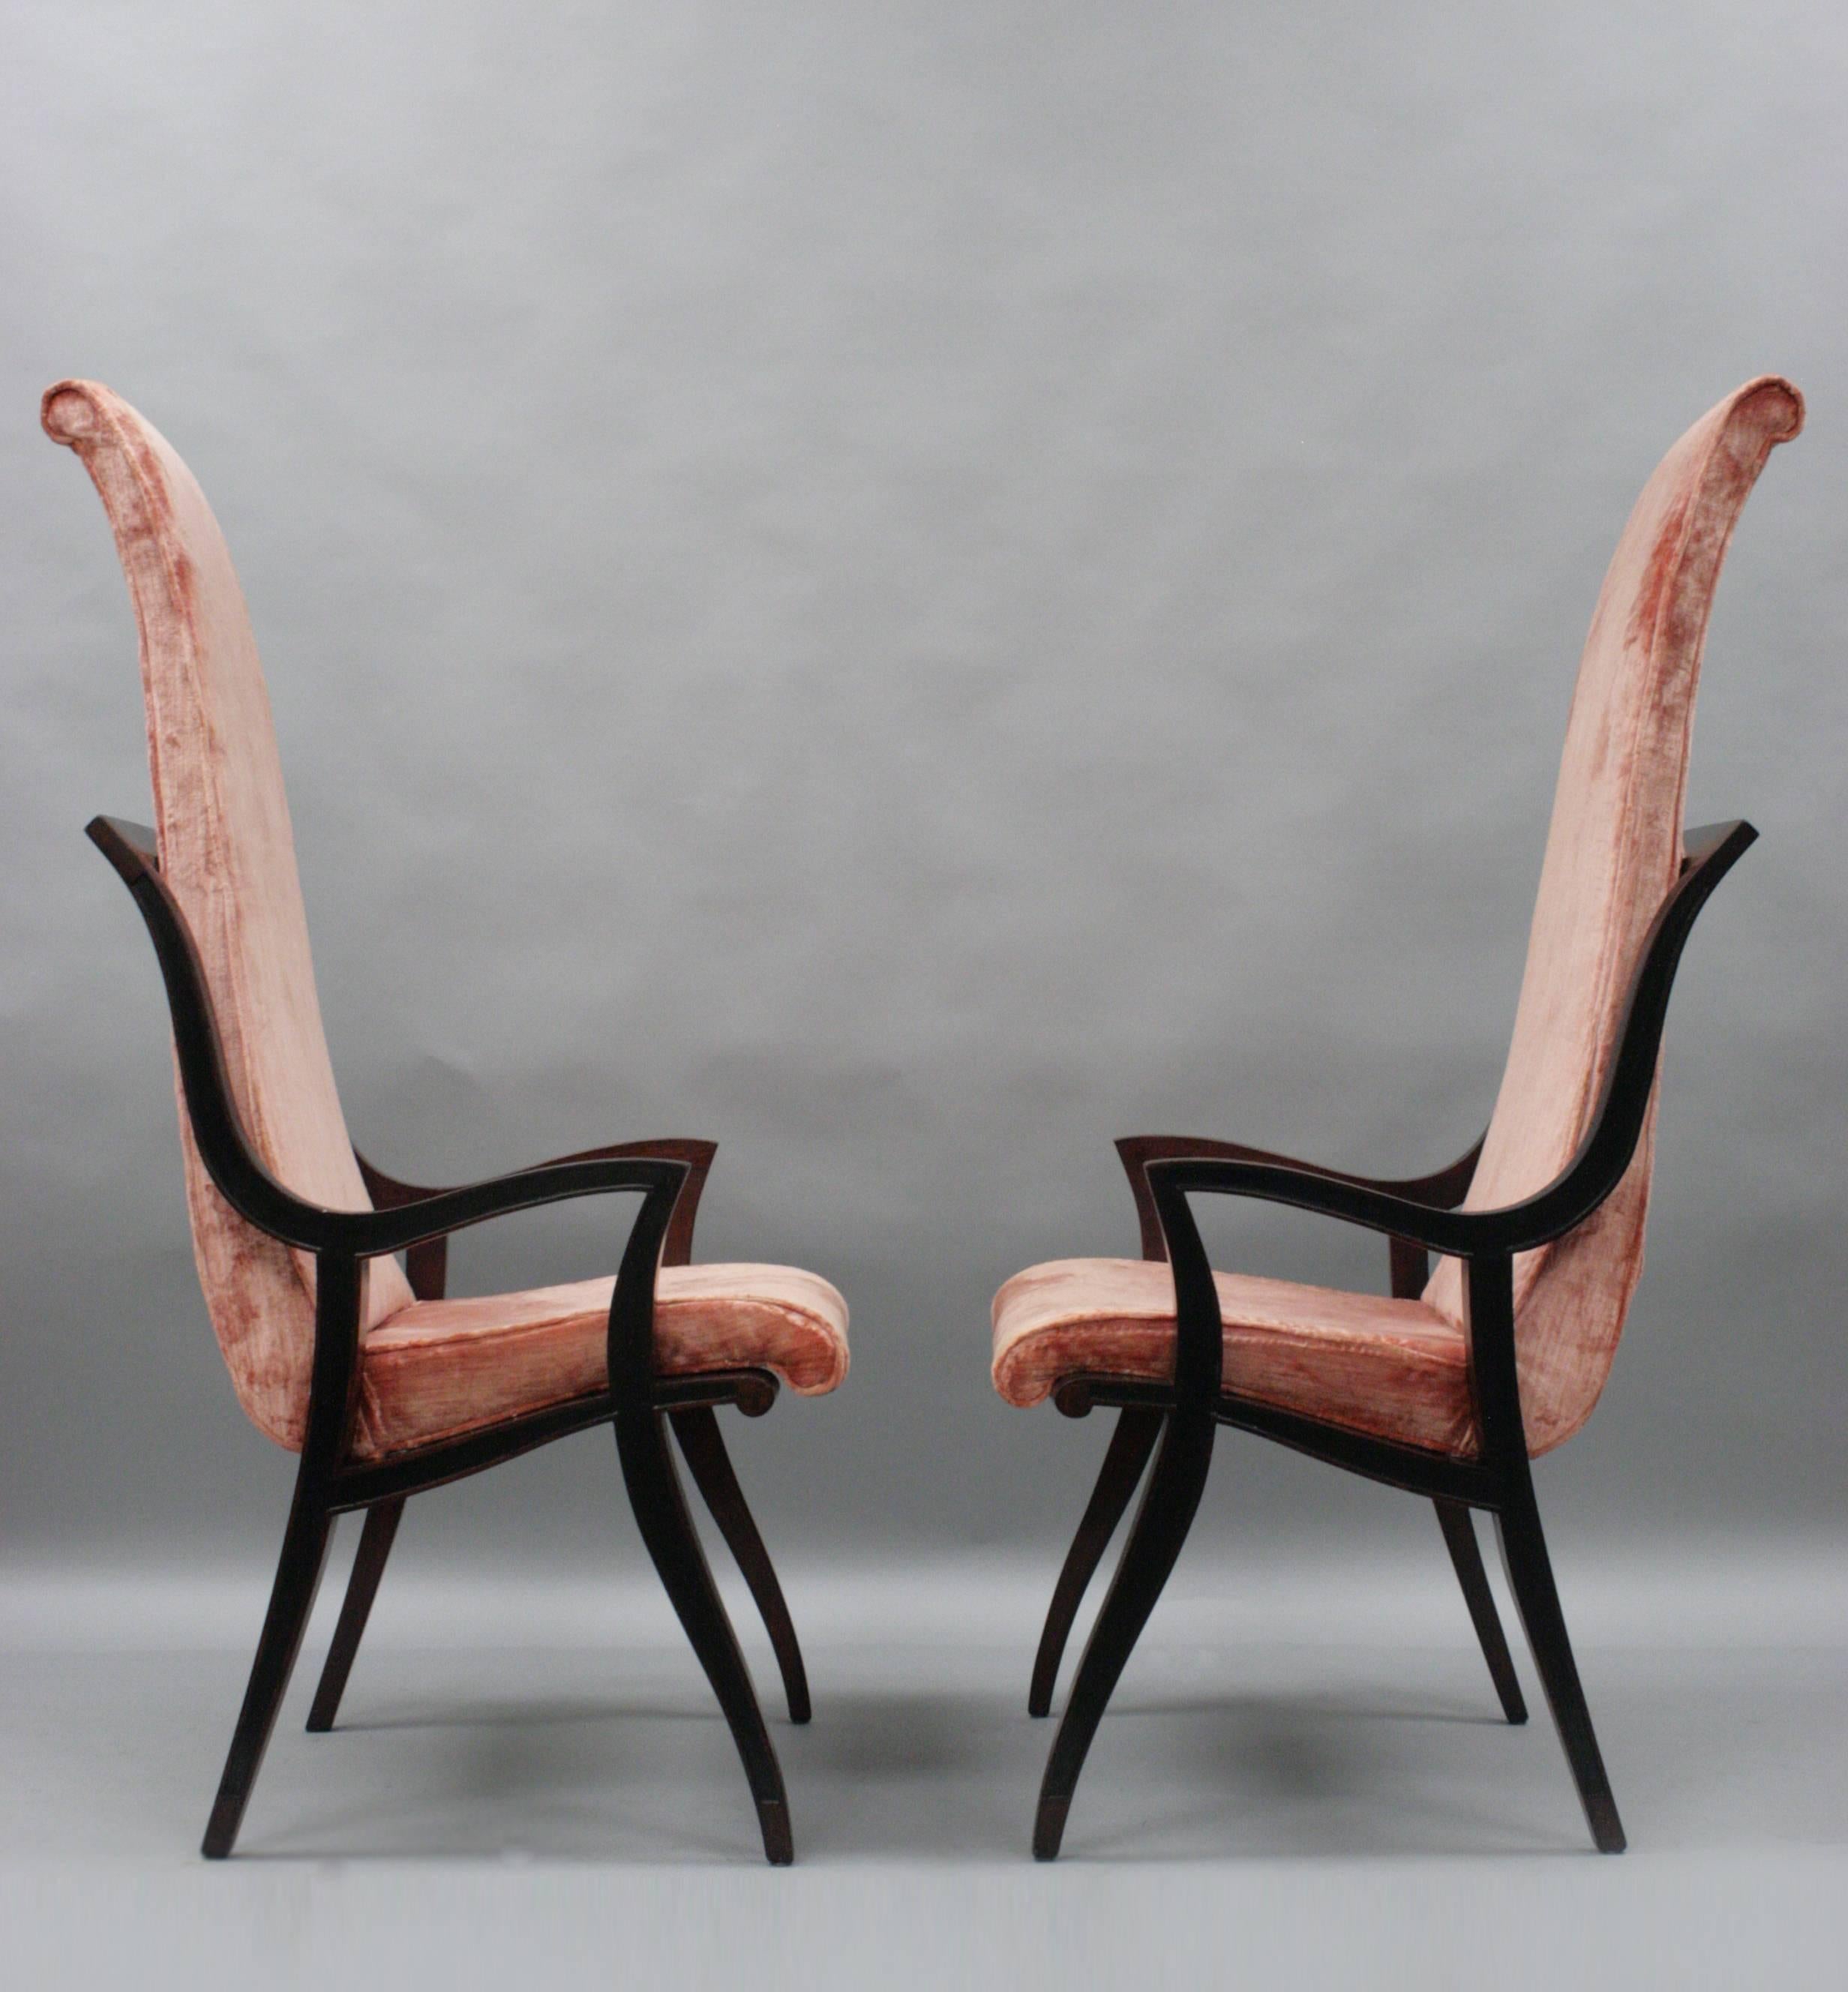 Pair of vintage Mid-Century Modern dining arm chairs with tall backs and sculpted wood frames. The pair features shapely solid wood construction, rolled backs and great whimsical form. The designer is unconfirmed but the style and form is similar to